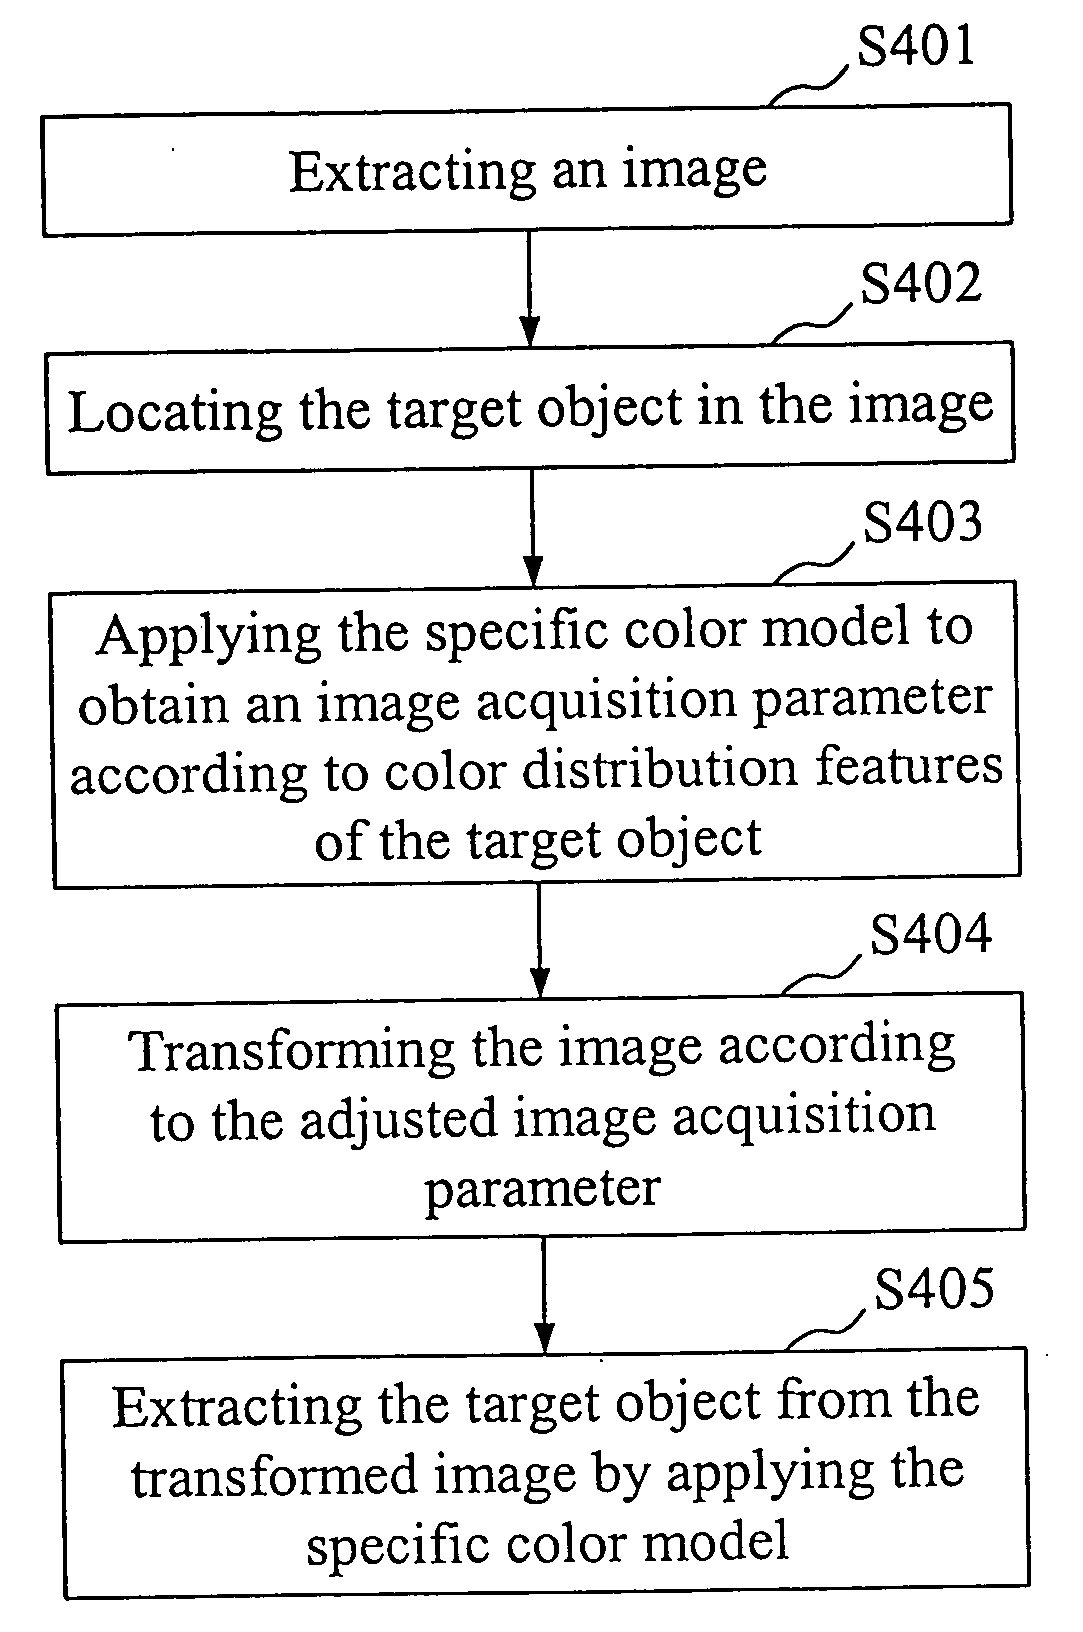 Method for adjusting image acquisition parameters to optimize object extraction